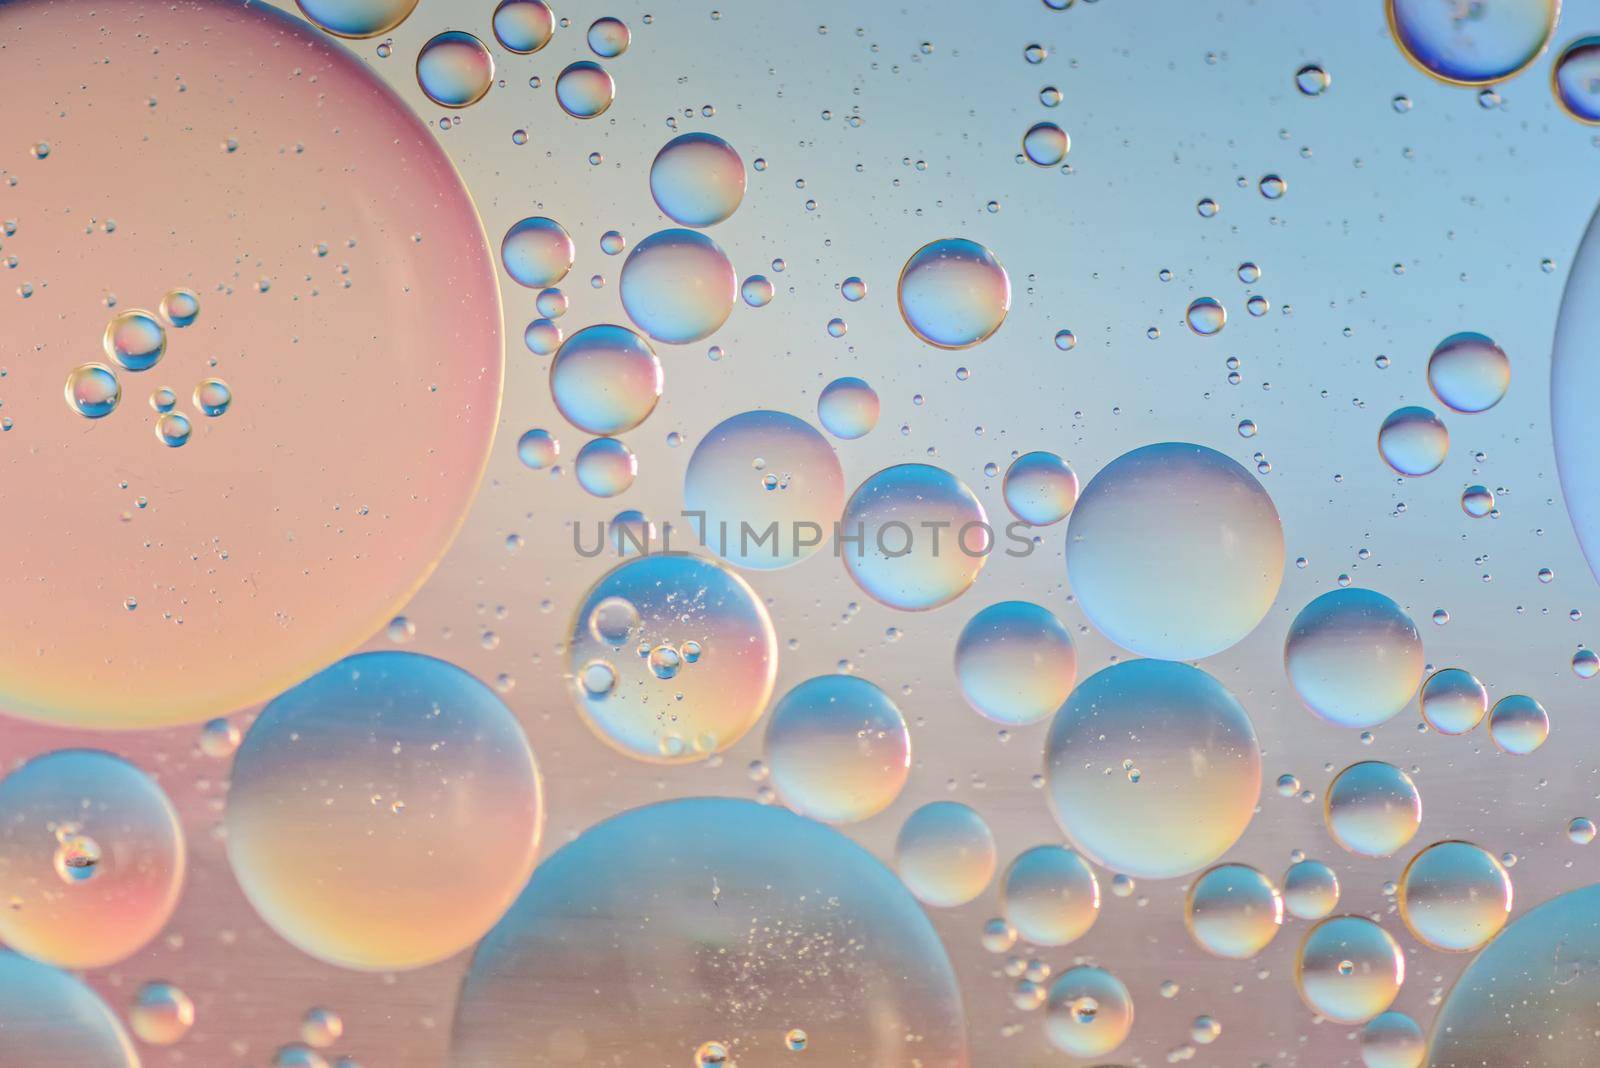 Oil drops in water. Abstract psychedelic pattern image multicolored. Abstract background with colorful gradient colors. Dof.